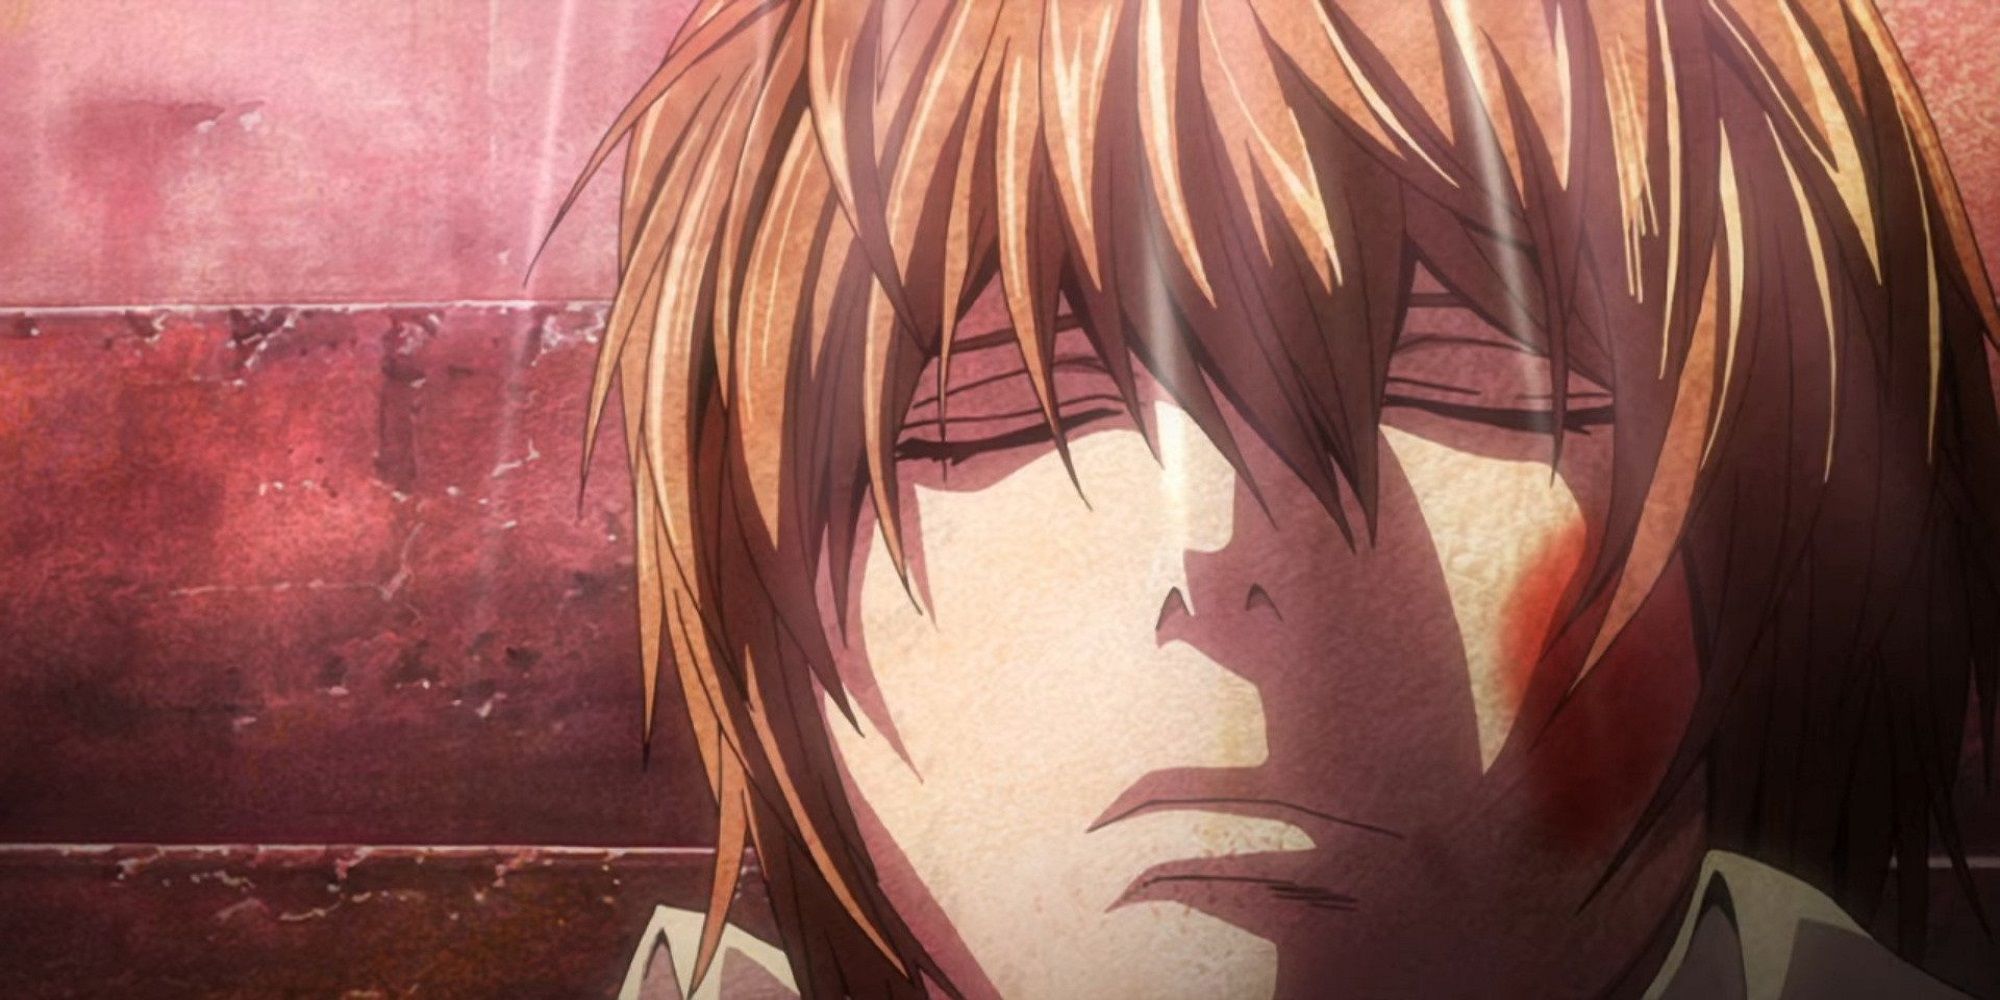 Light's death in the final episode of Death Note